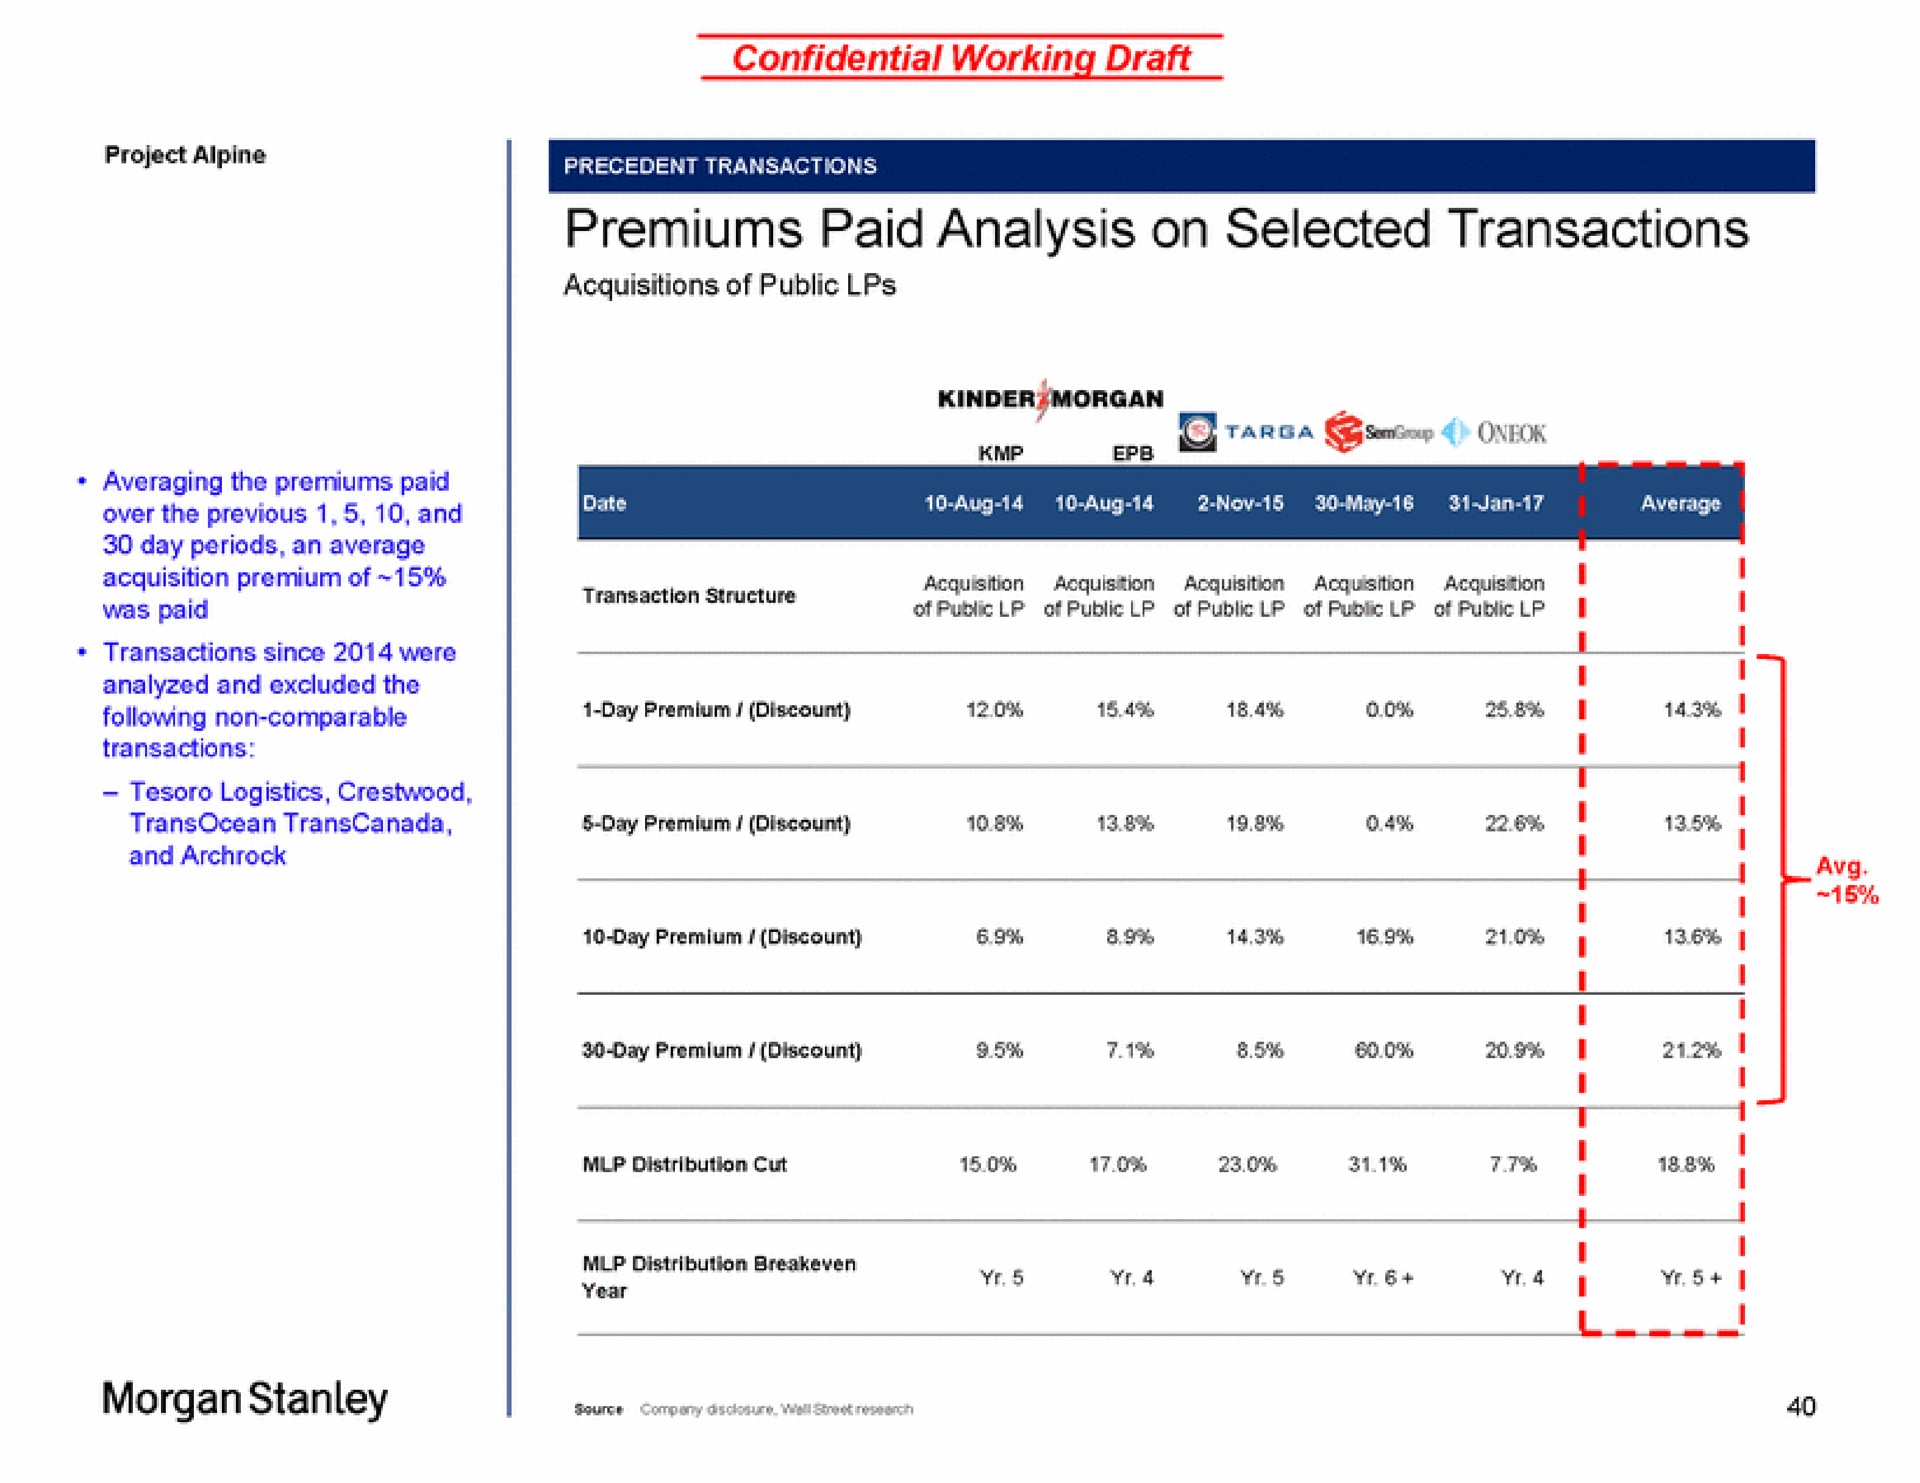 premiums paid analysis on selected transactions morgan | Morgan Stanley